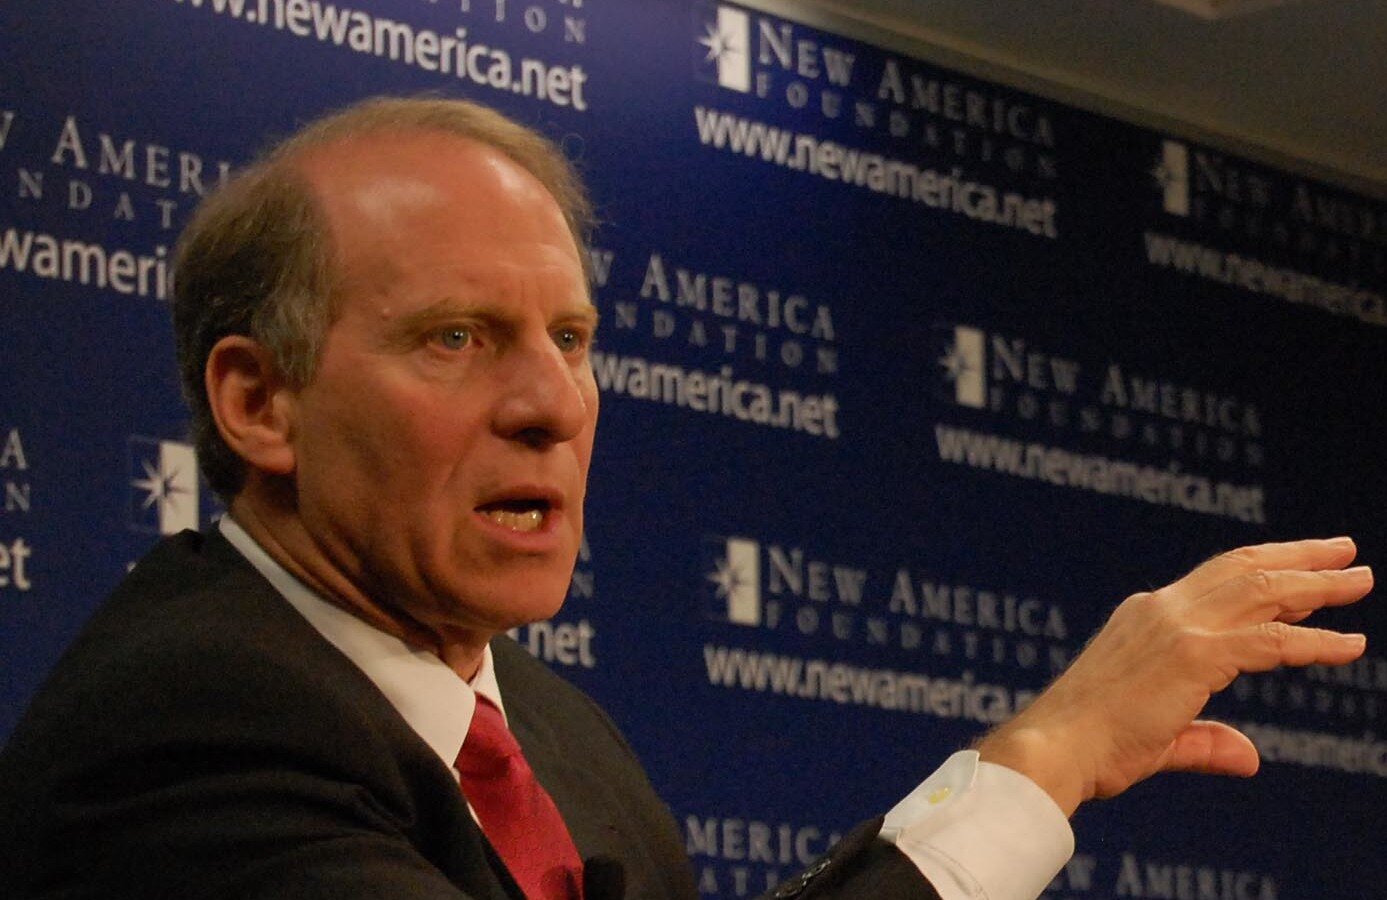 PICTURED: Richard N. Haass, President, Council on Foreign Relations. Photo credit: New America. CC 2.0